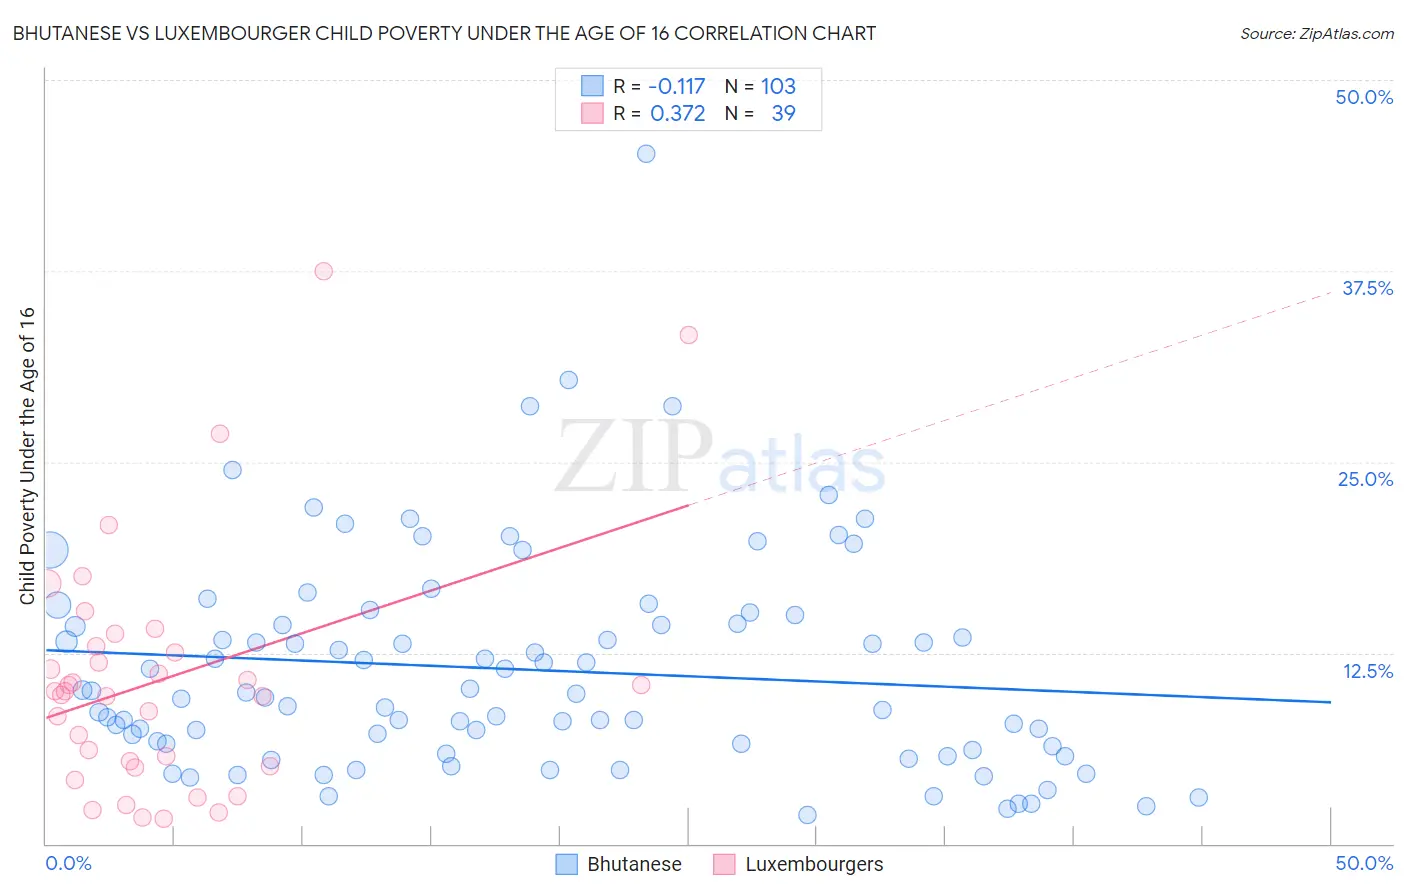 Bhutanese vs Luxembourger Child Poverty Under the Age of 16